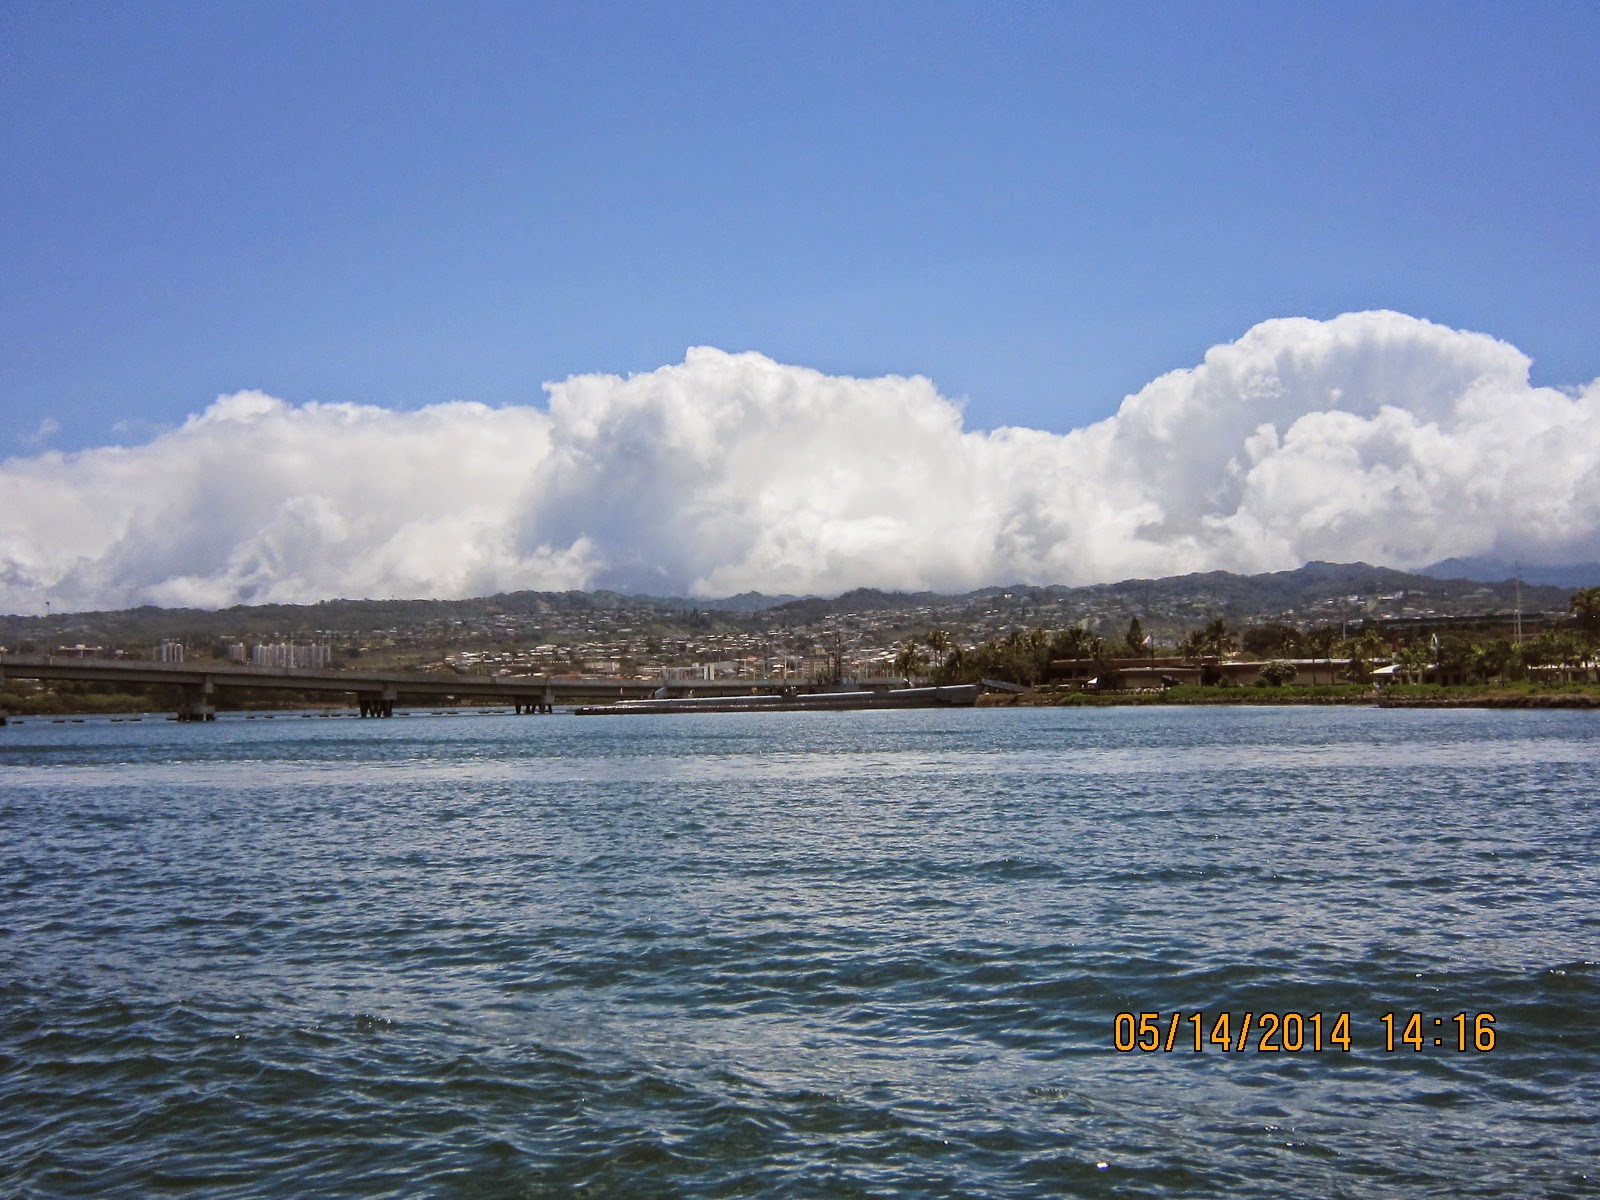 FROM BOAT AT PEARL HARBOR